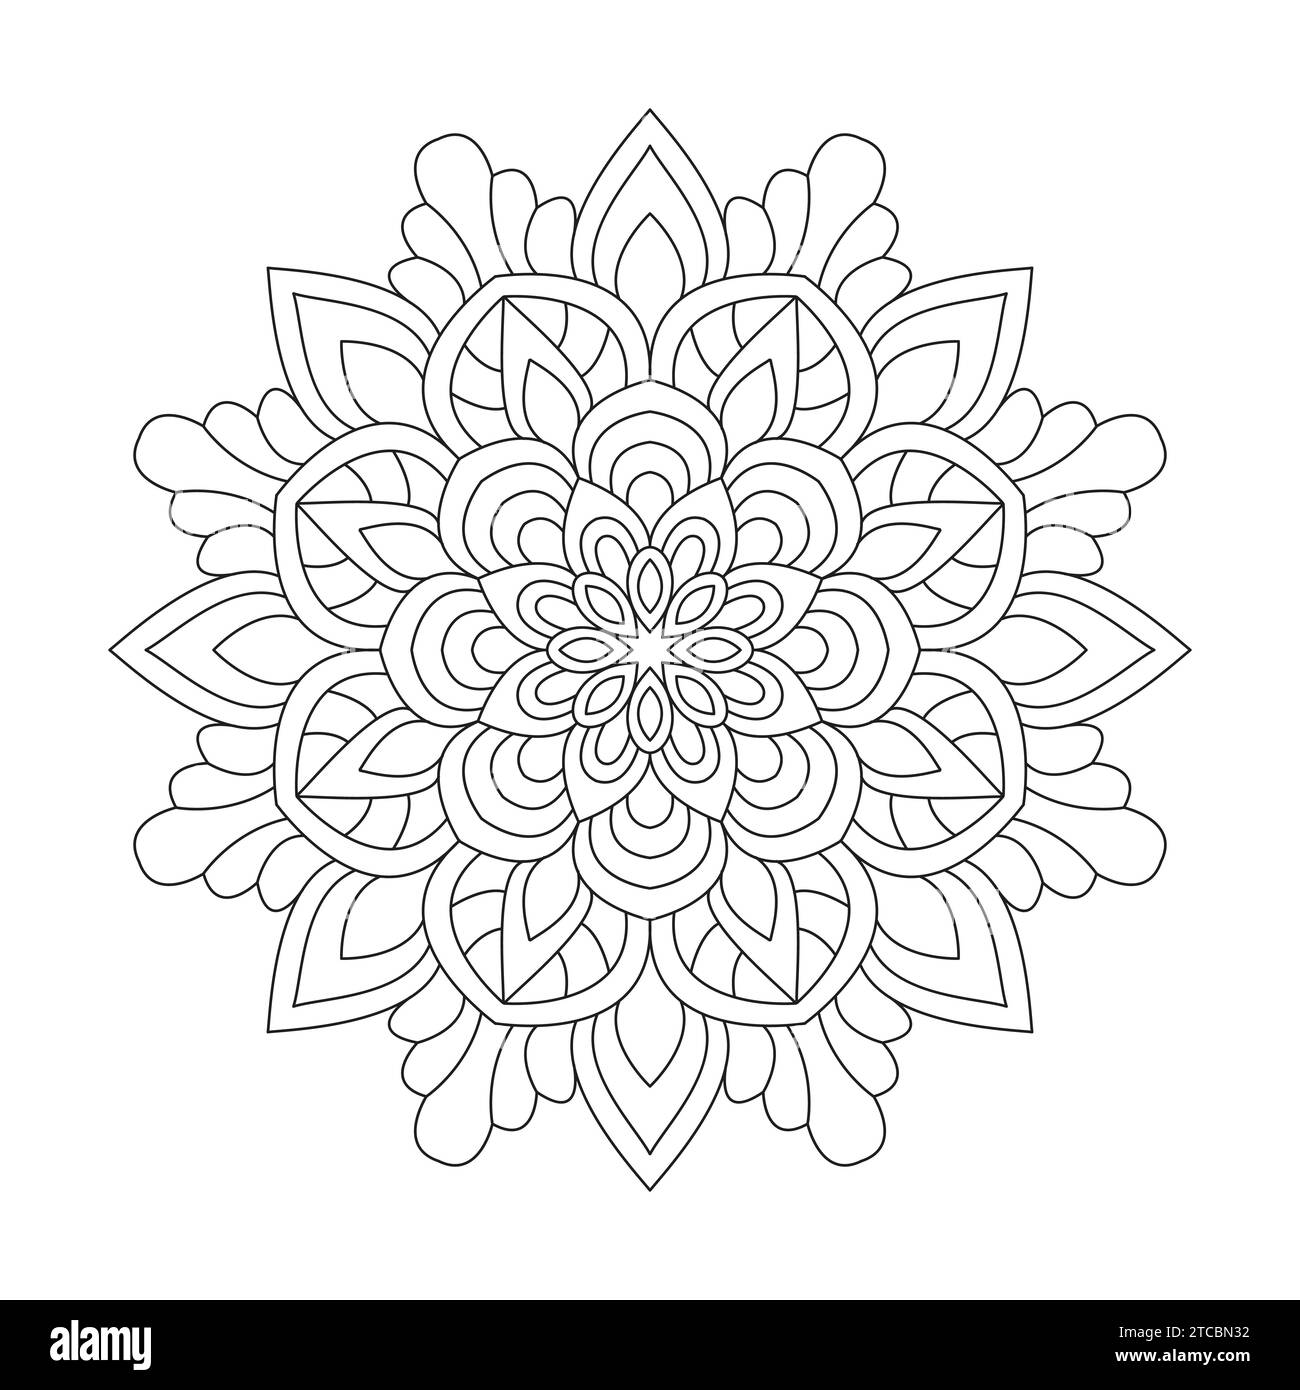 Starry night adult mandala colouring book page for KDP book interior. Peaceful Petals, Ability to Relax, Brain Experiences, Harmonious Haven, Peaceful Stock Vector